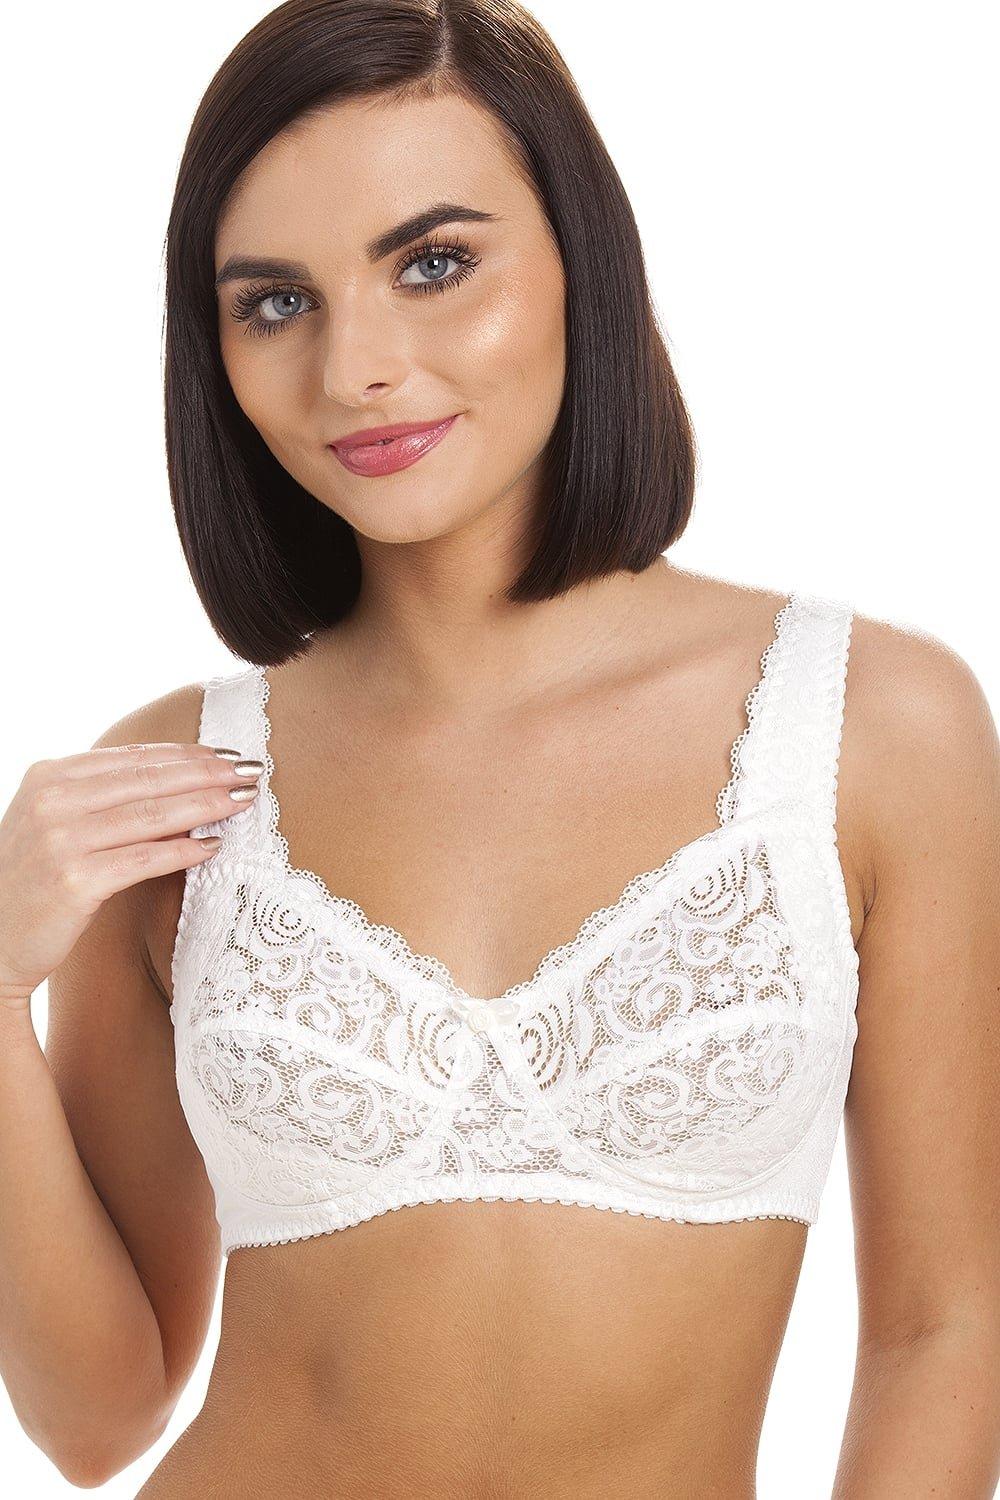 Camille Womens White Soft Cup Non-Wired Bra